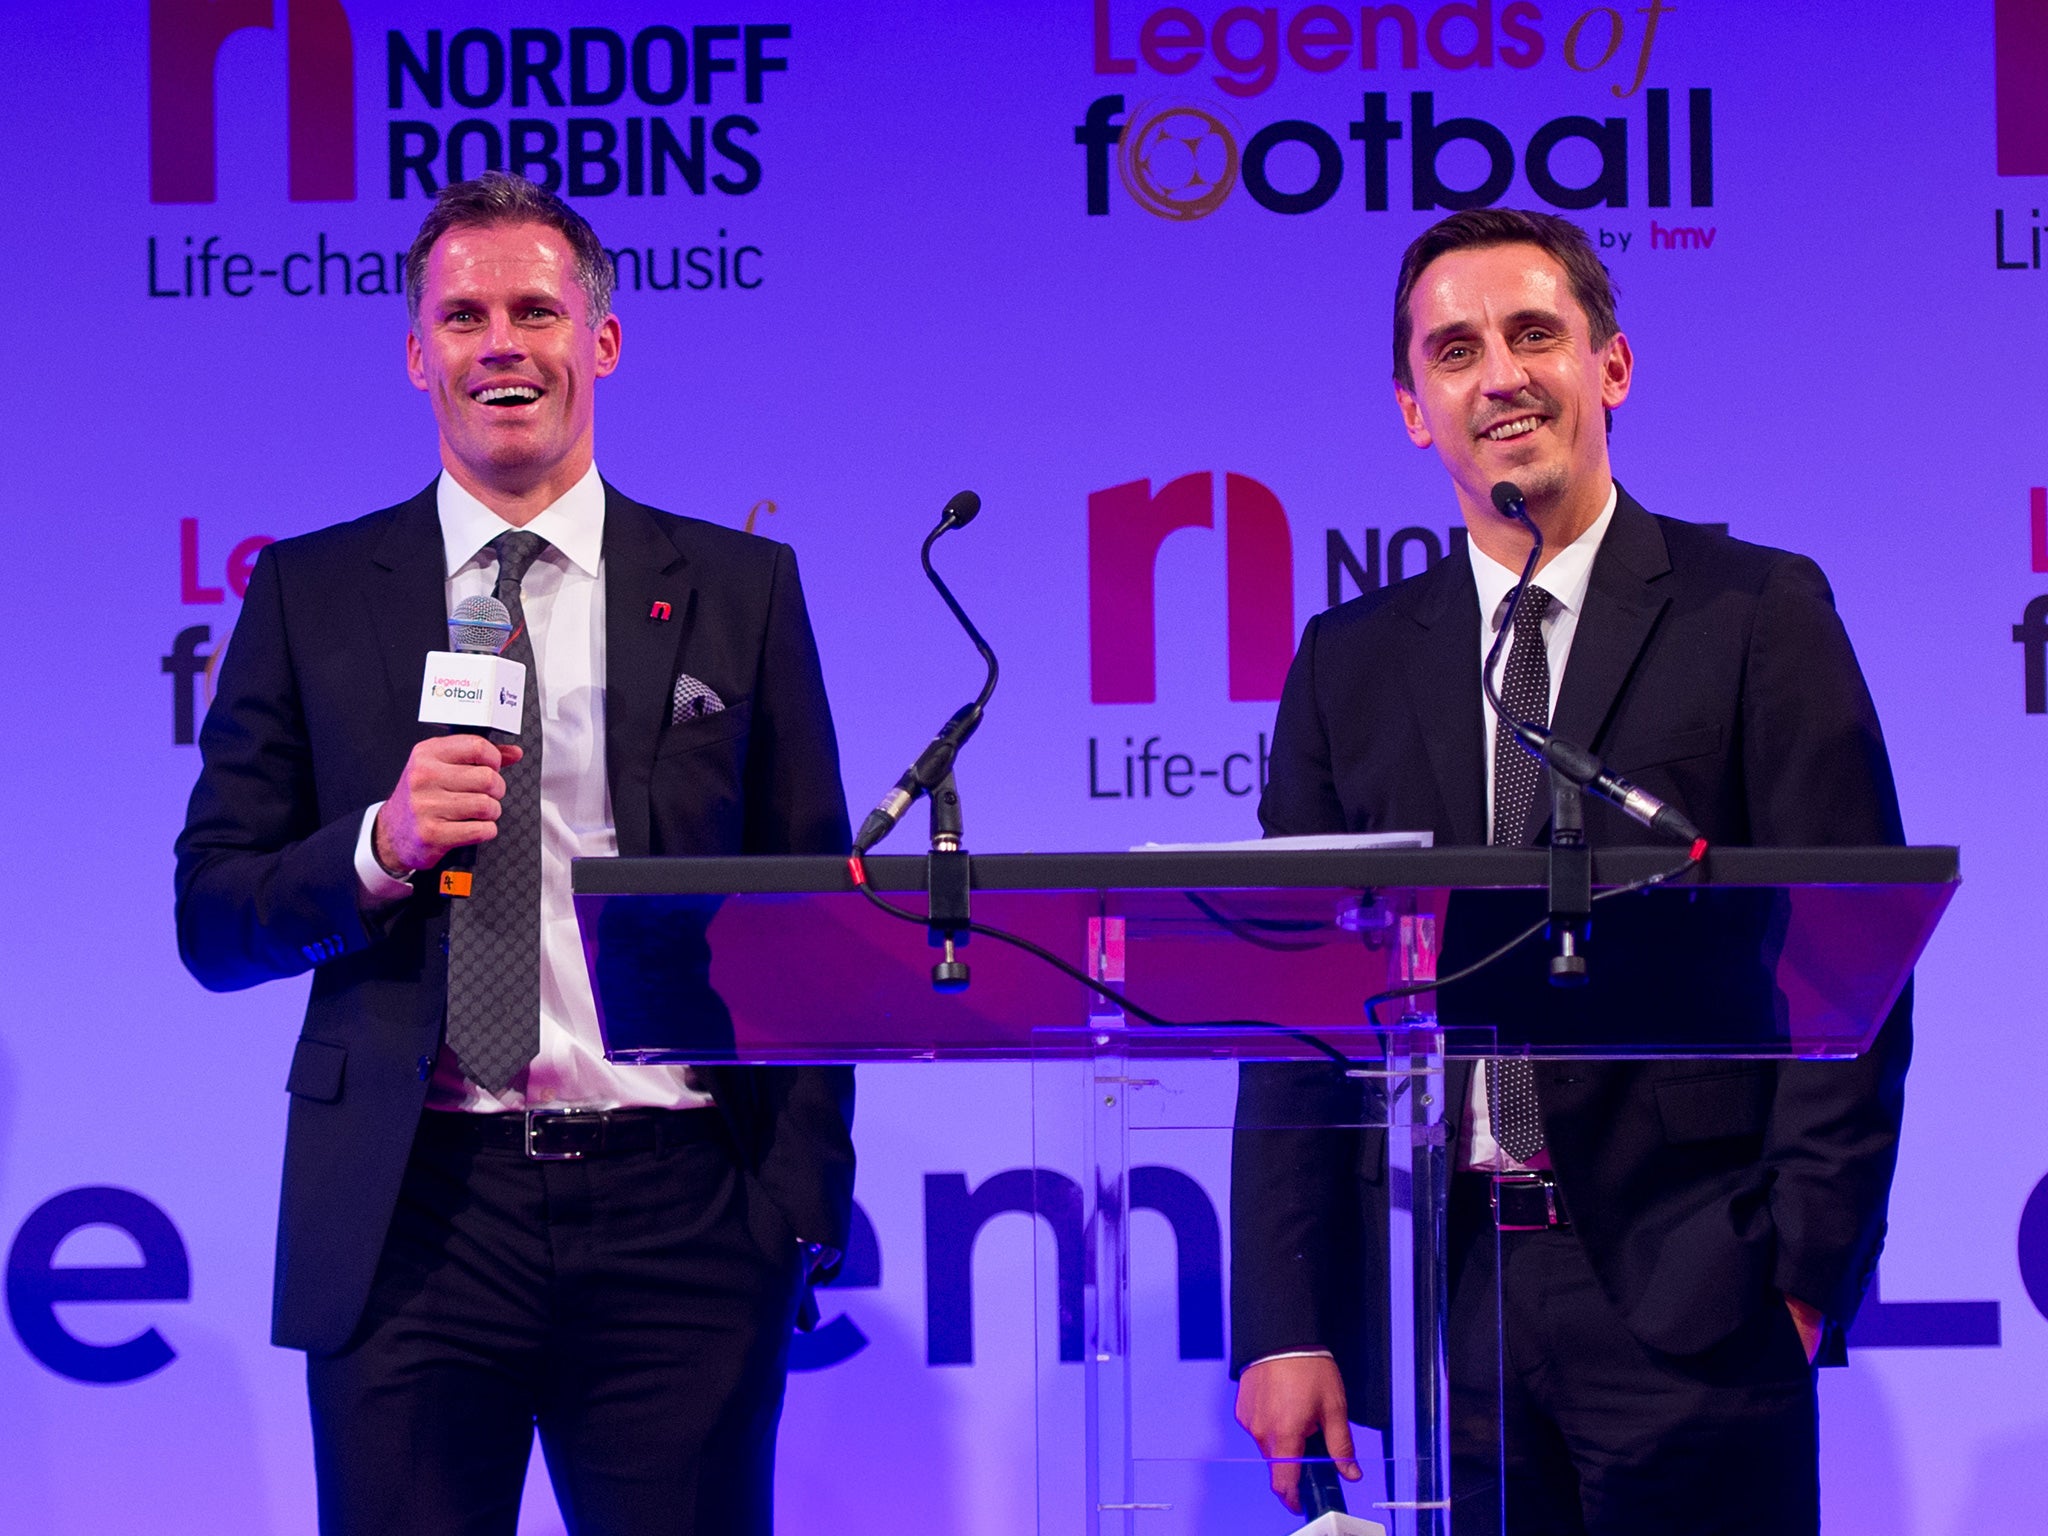 Carragher and Neville are not shy of making jokes at each other's expense